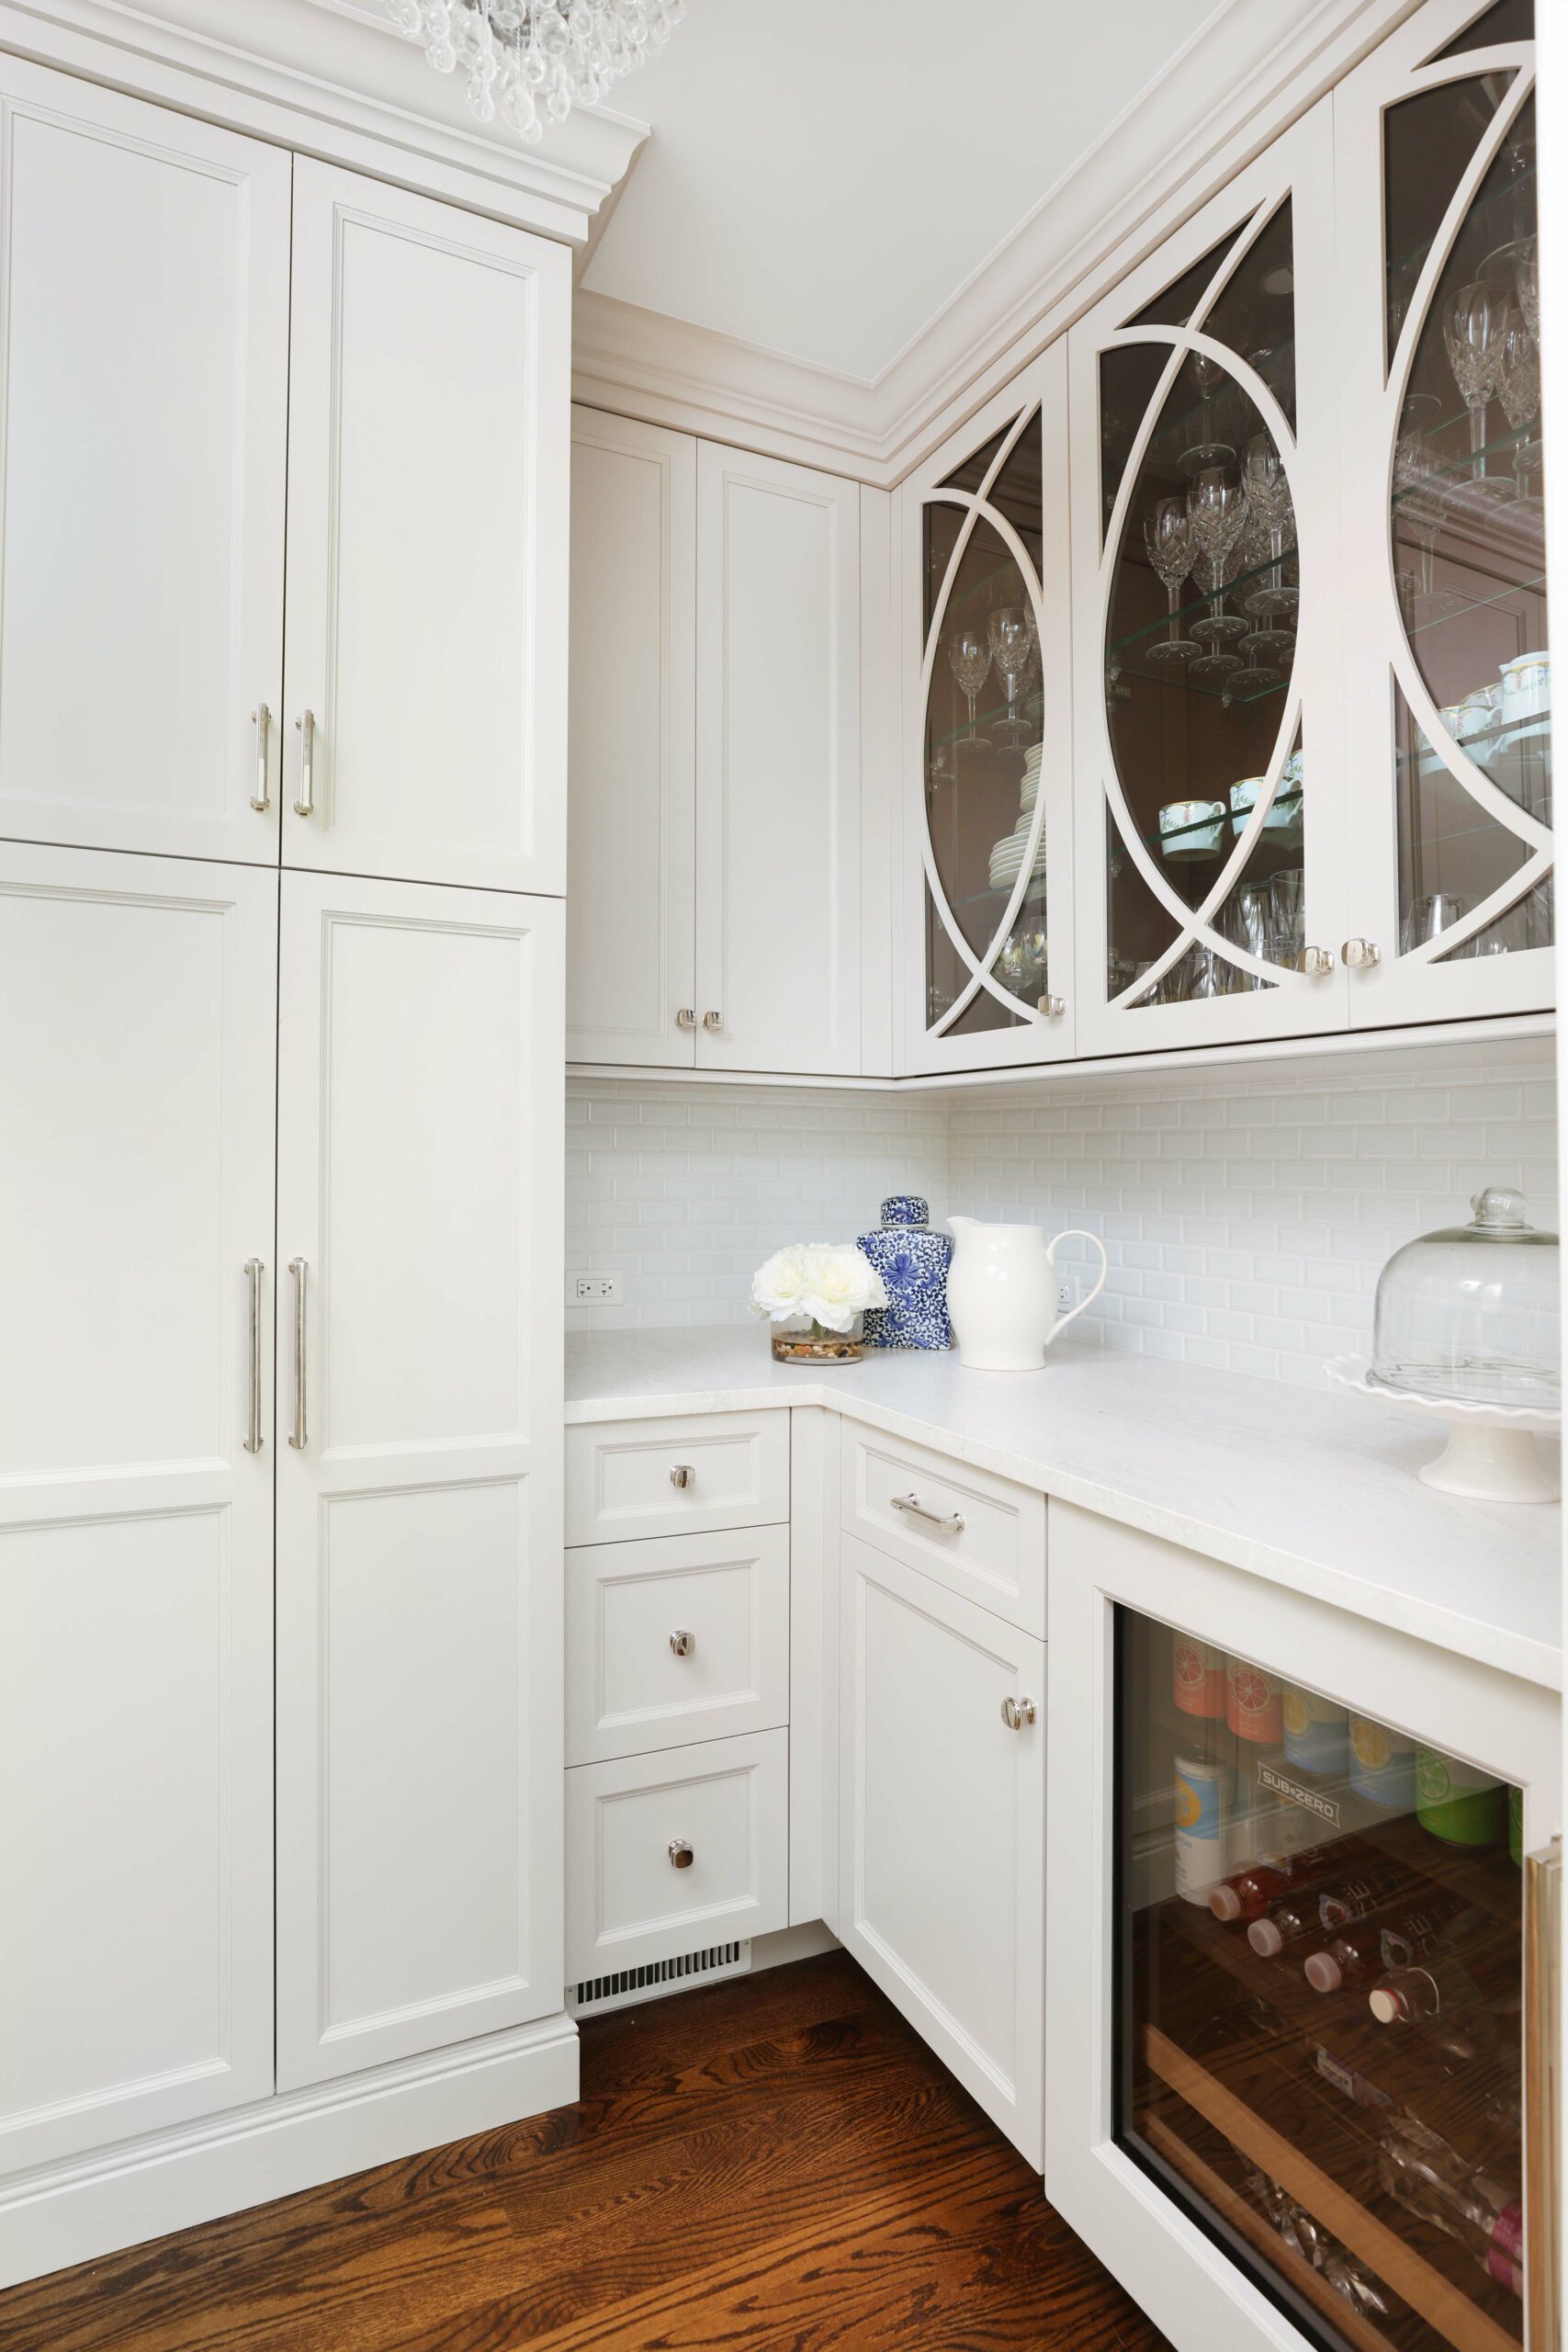 white kitchen beverage chiller and upper cabinets with decorative glass fronts